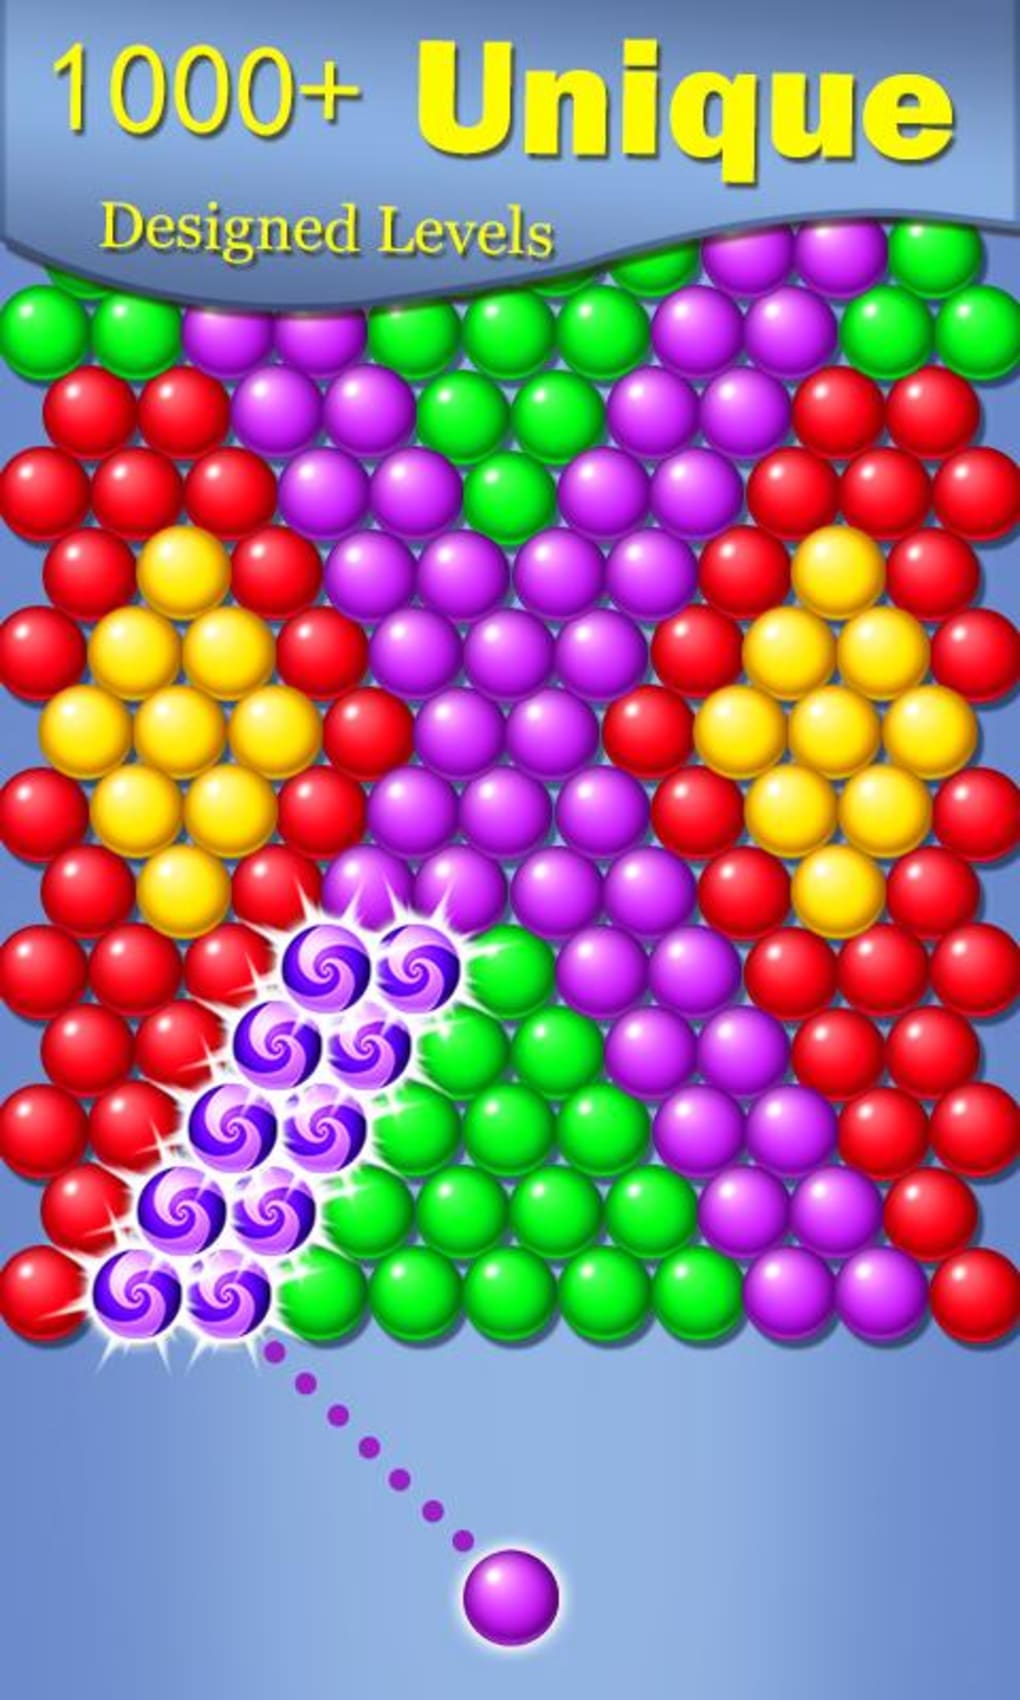 download the last version for windows Pastry Pop Blast - Bubble Shooter